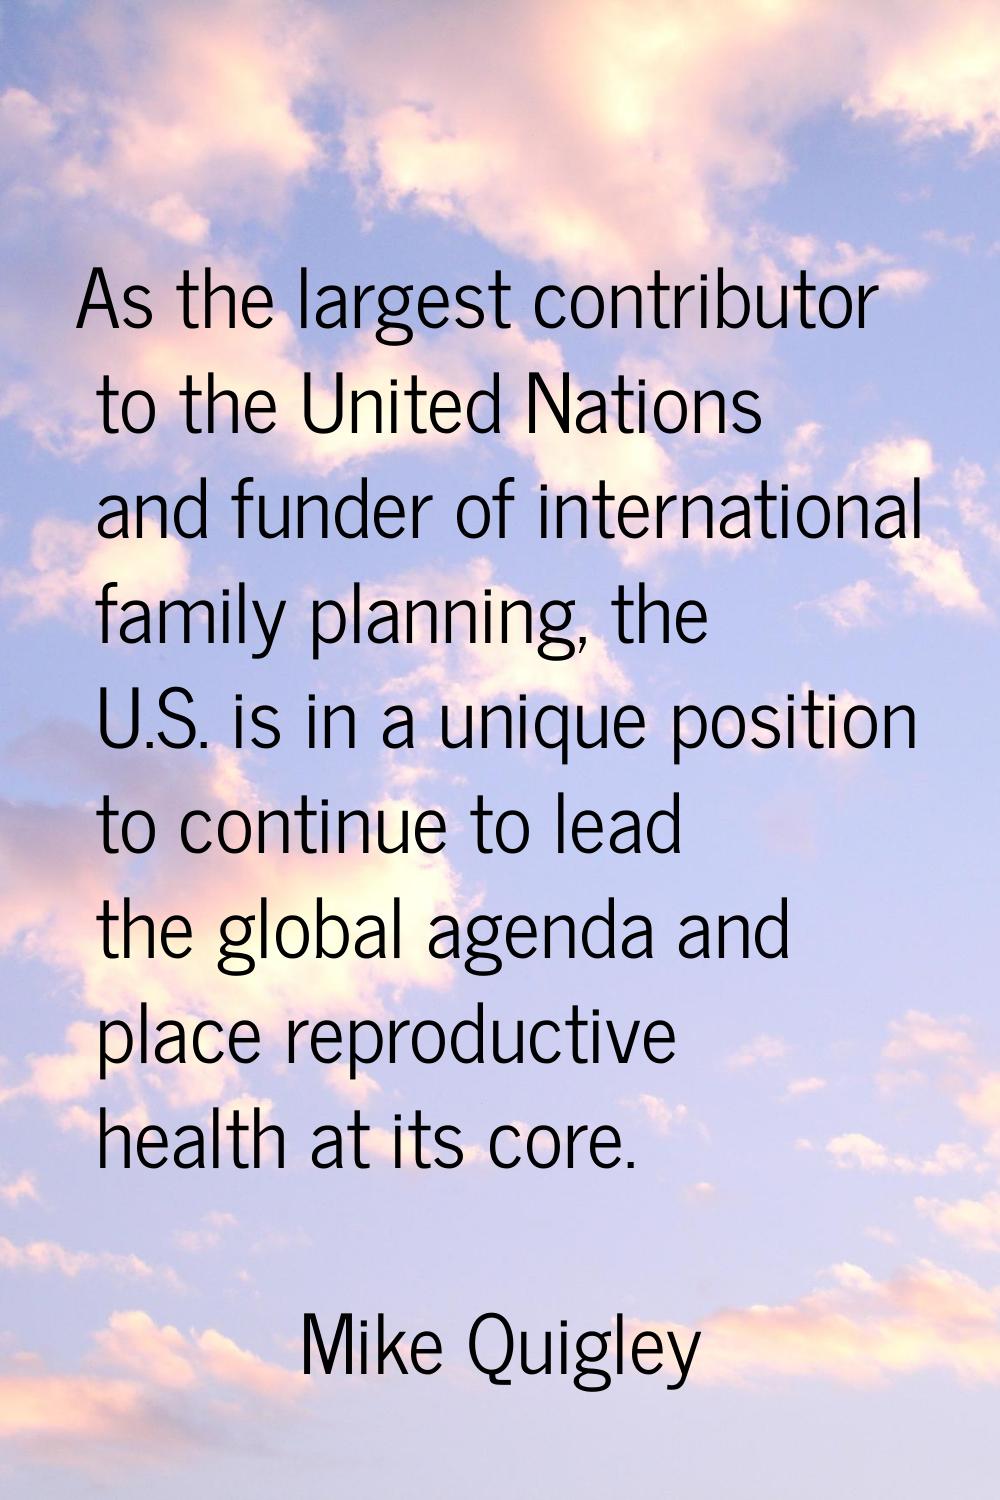 As the largest contributor to the United Nations and funder of international family planning, the U